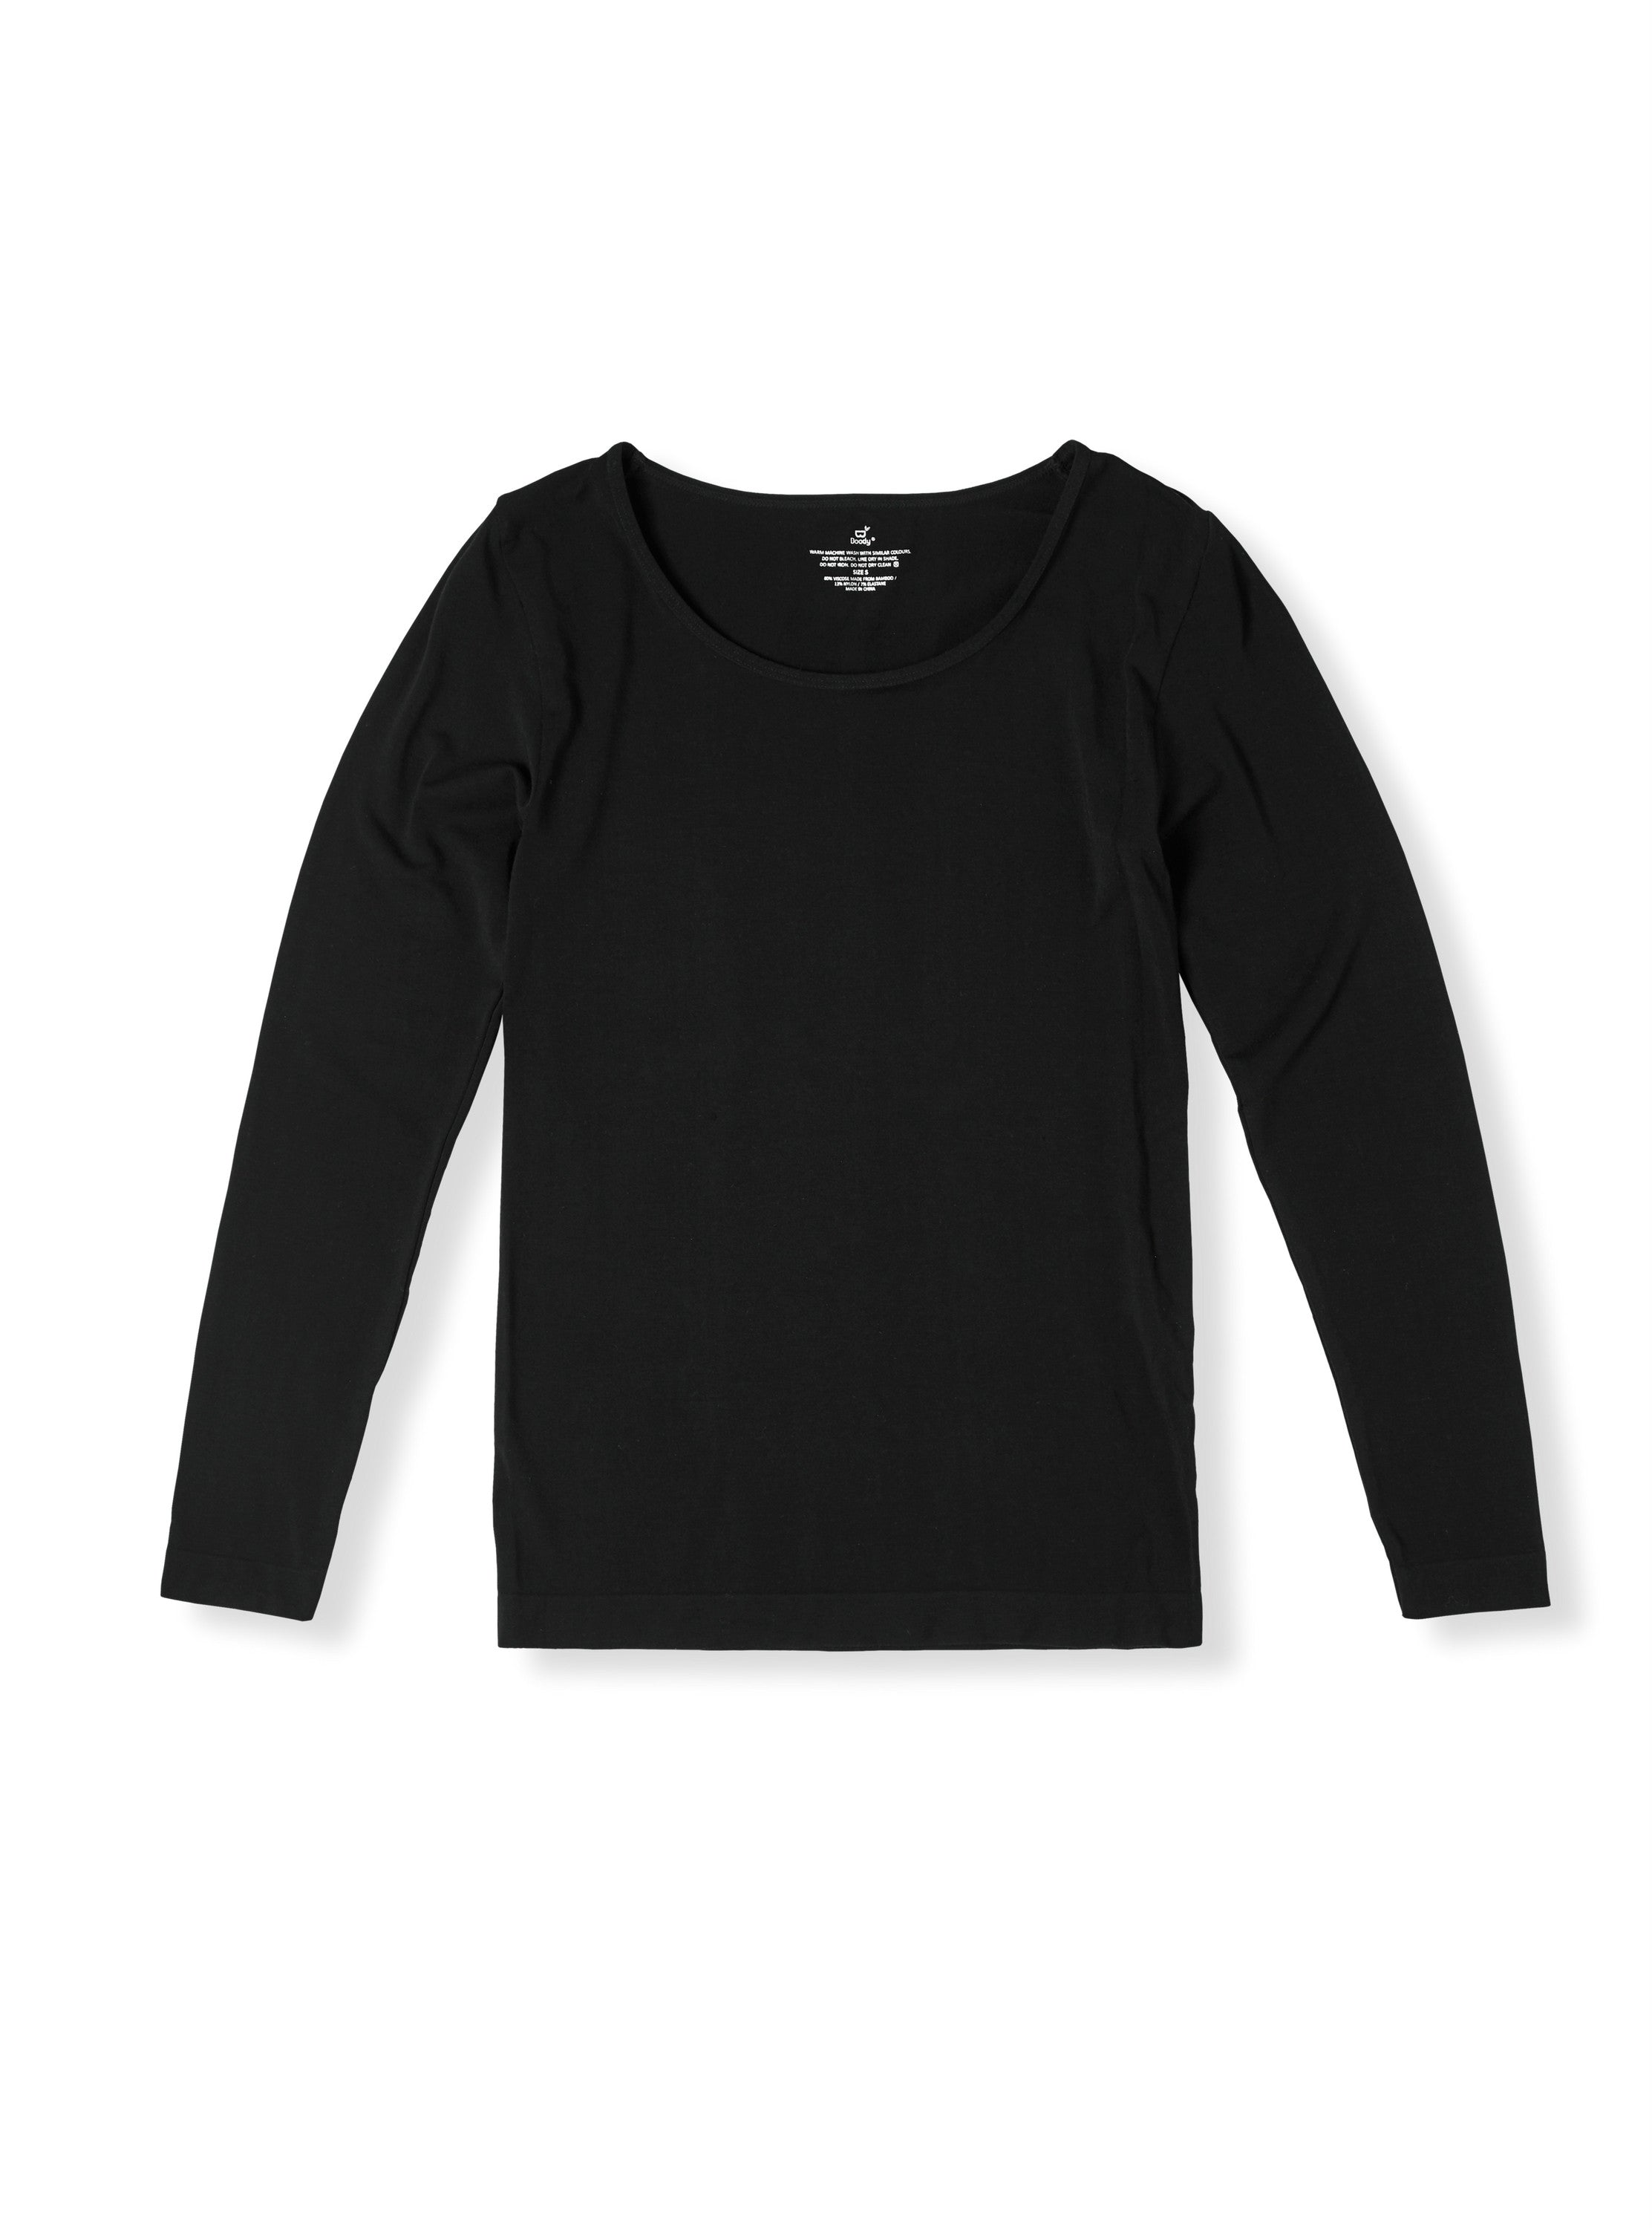 Boody Bamboo Women's Long Sleeve Top in Black Flat Lay Front